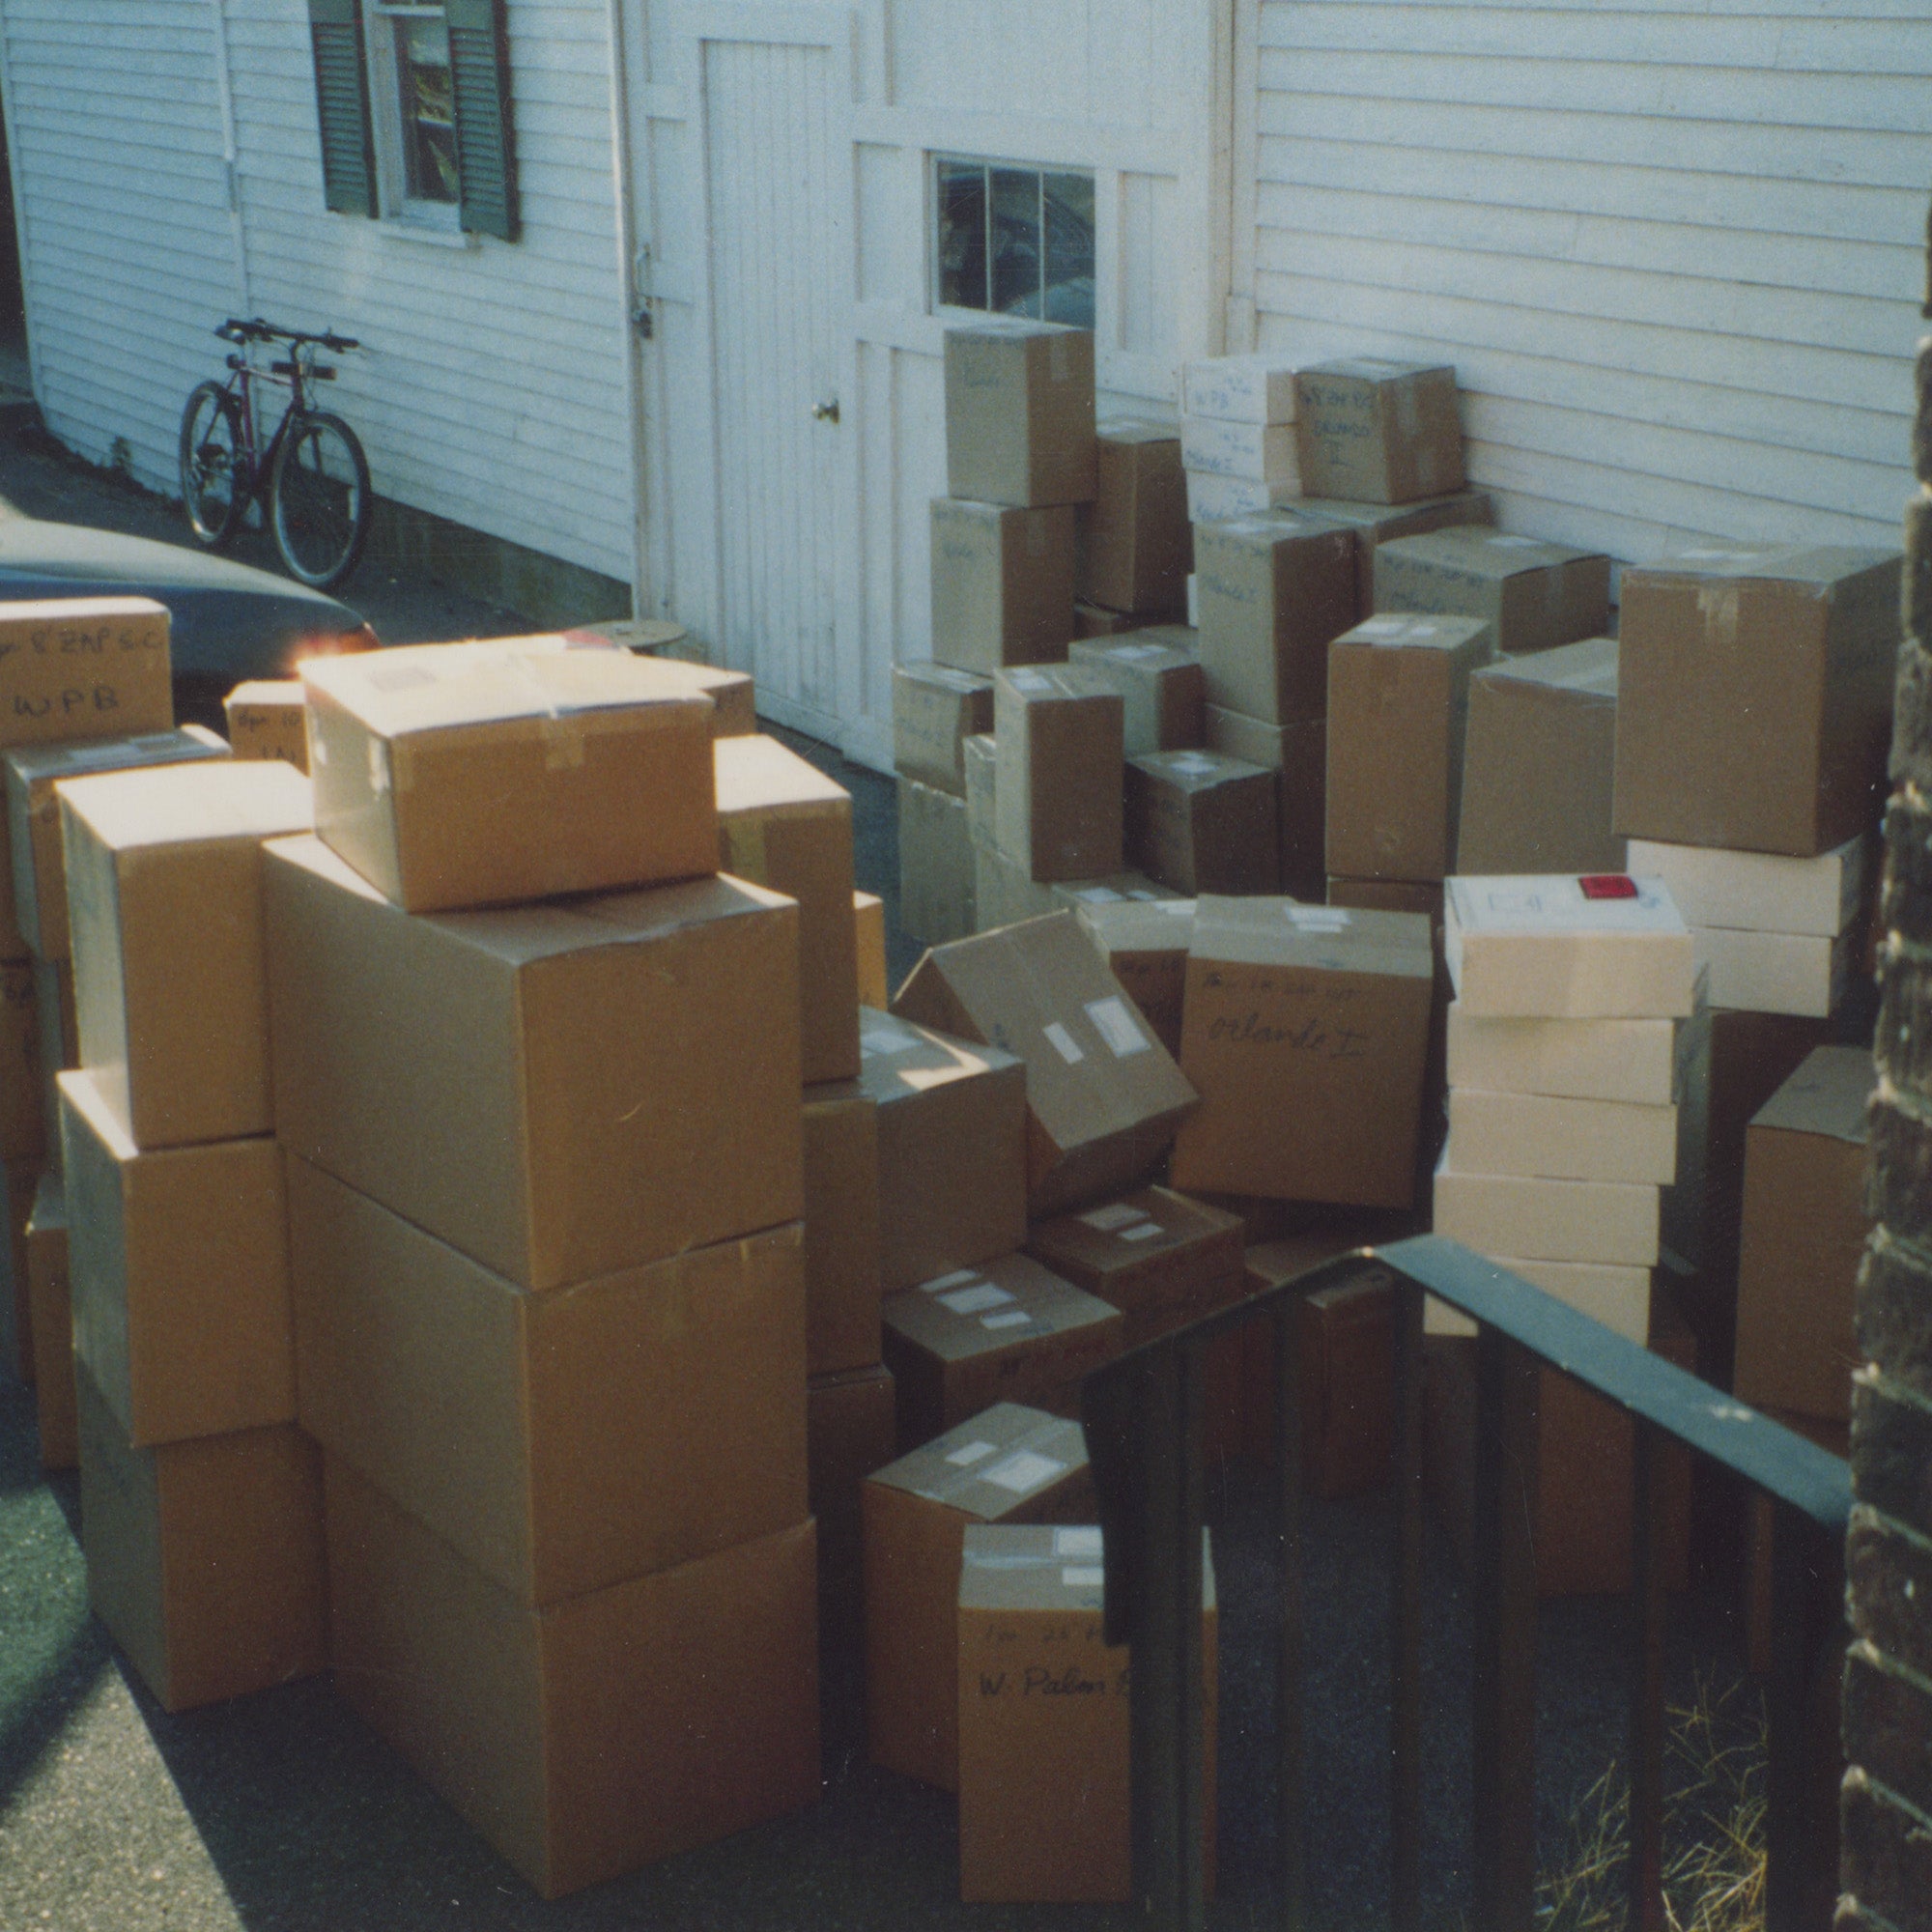 A stack of boxes in front of a house.